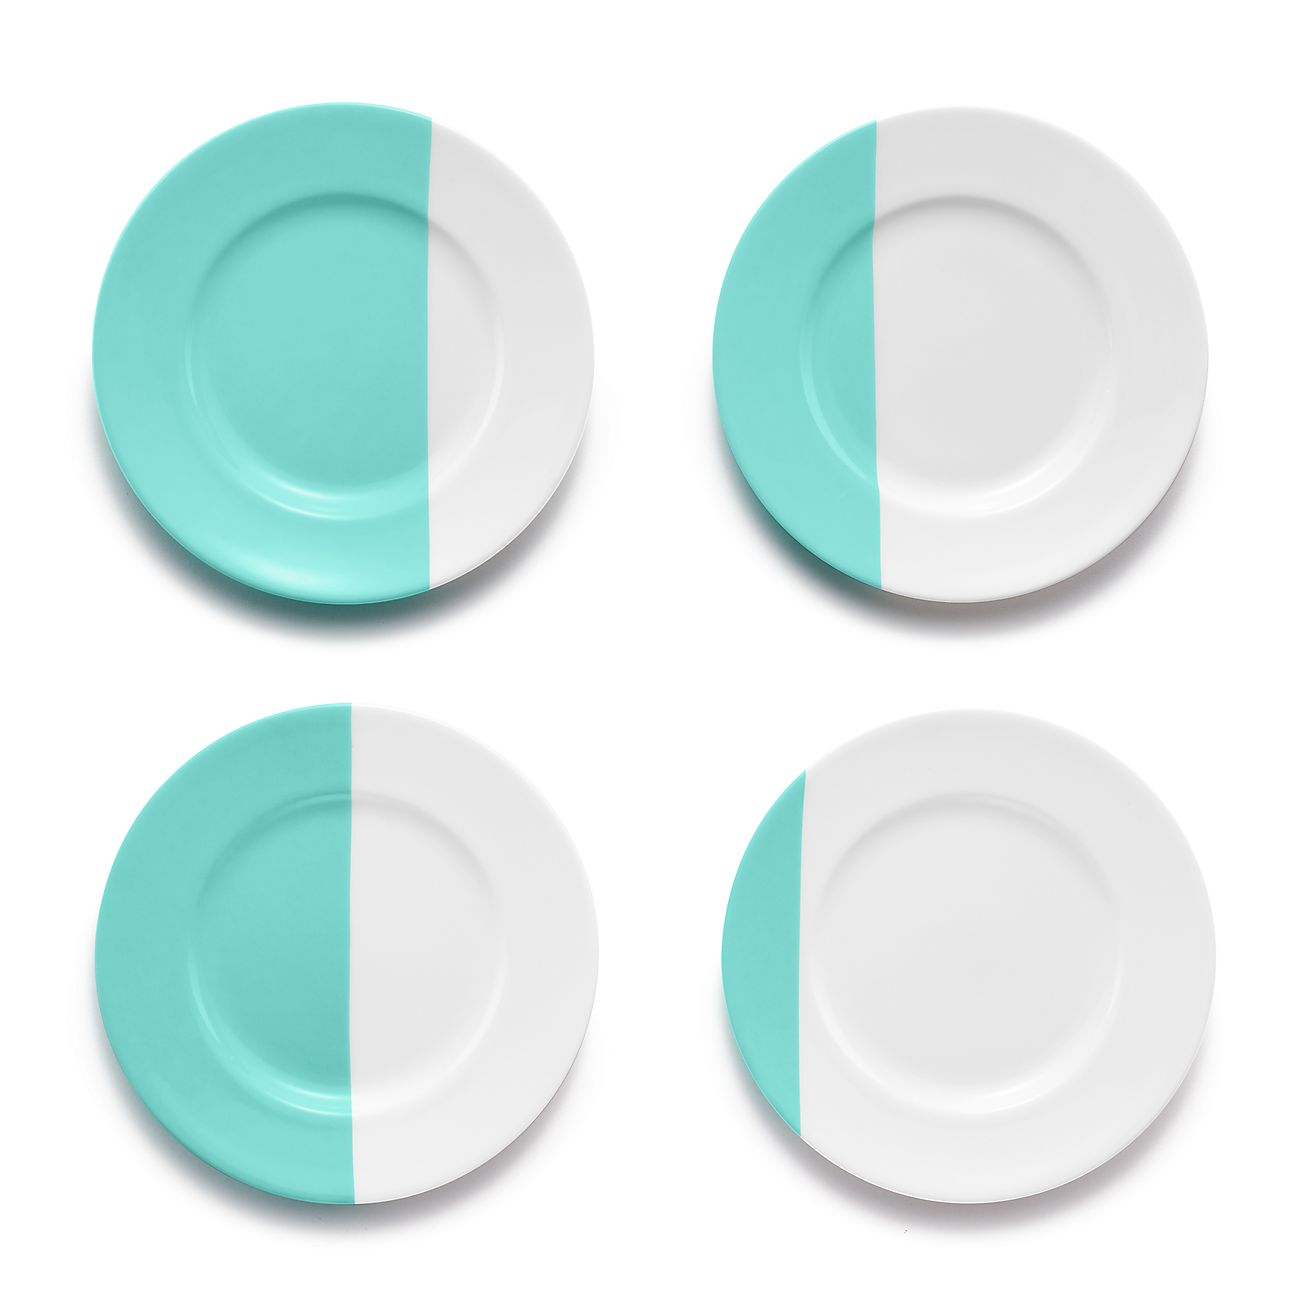 tiffany and co colors